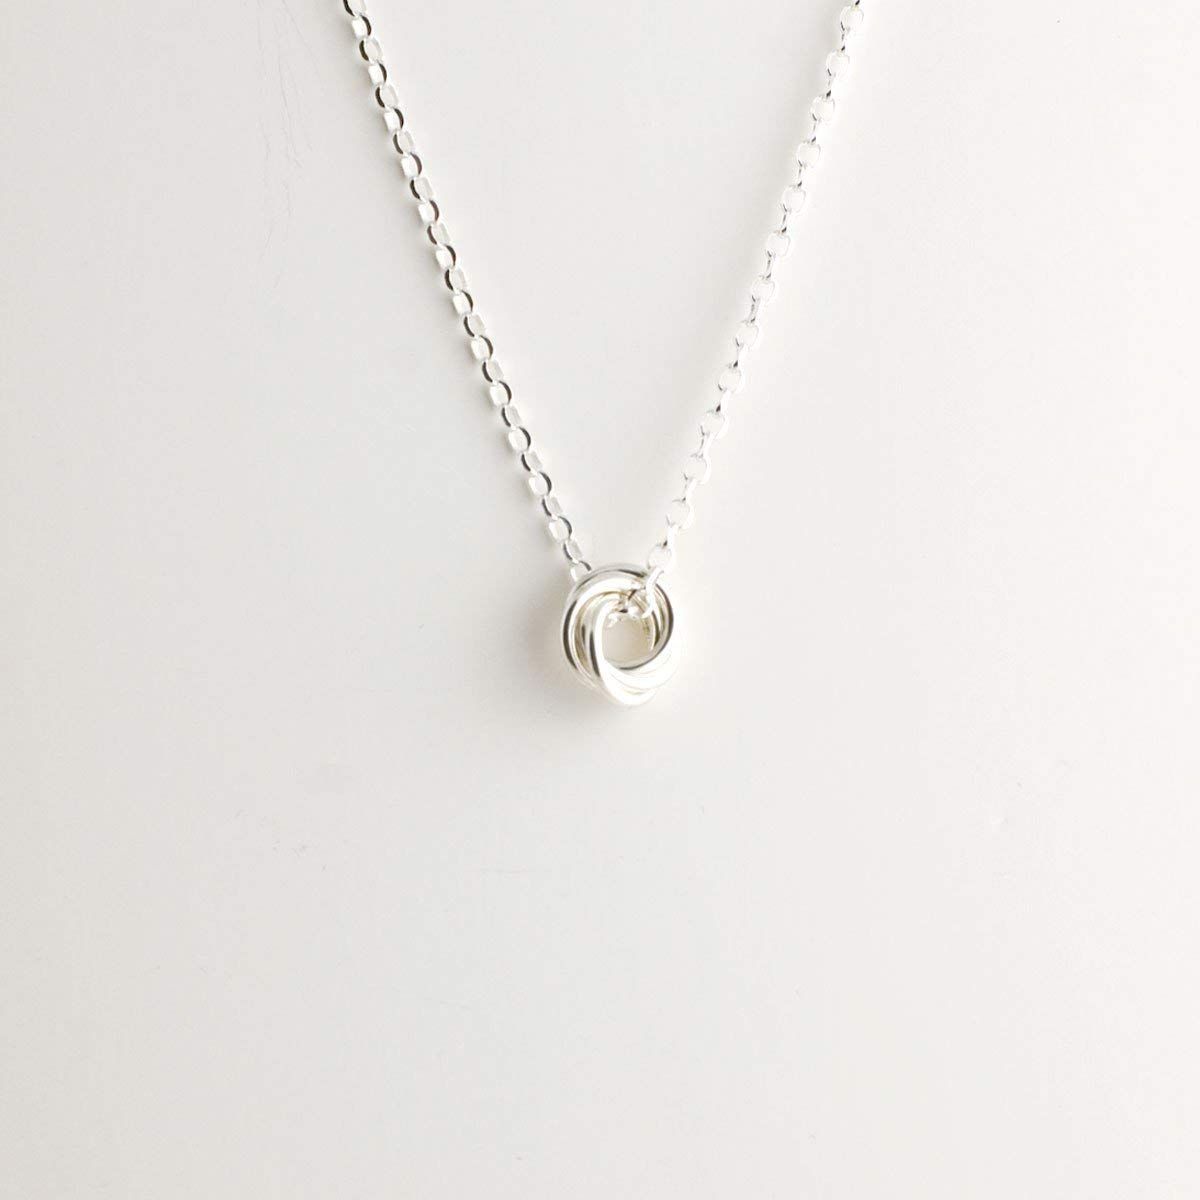 Cheap Silver Love Knot Necklace, Find Silver Love Knot Necklace With Regard To Most Current Shimmering Knot Pendant Necklaces (View 14 of 25)